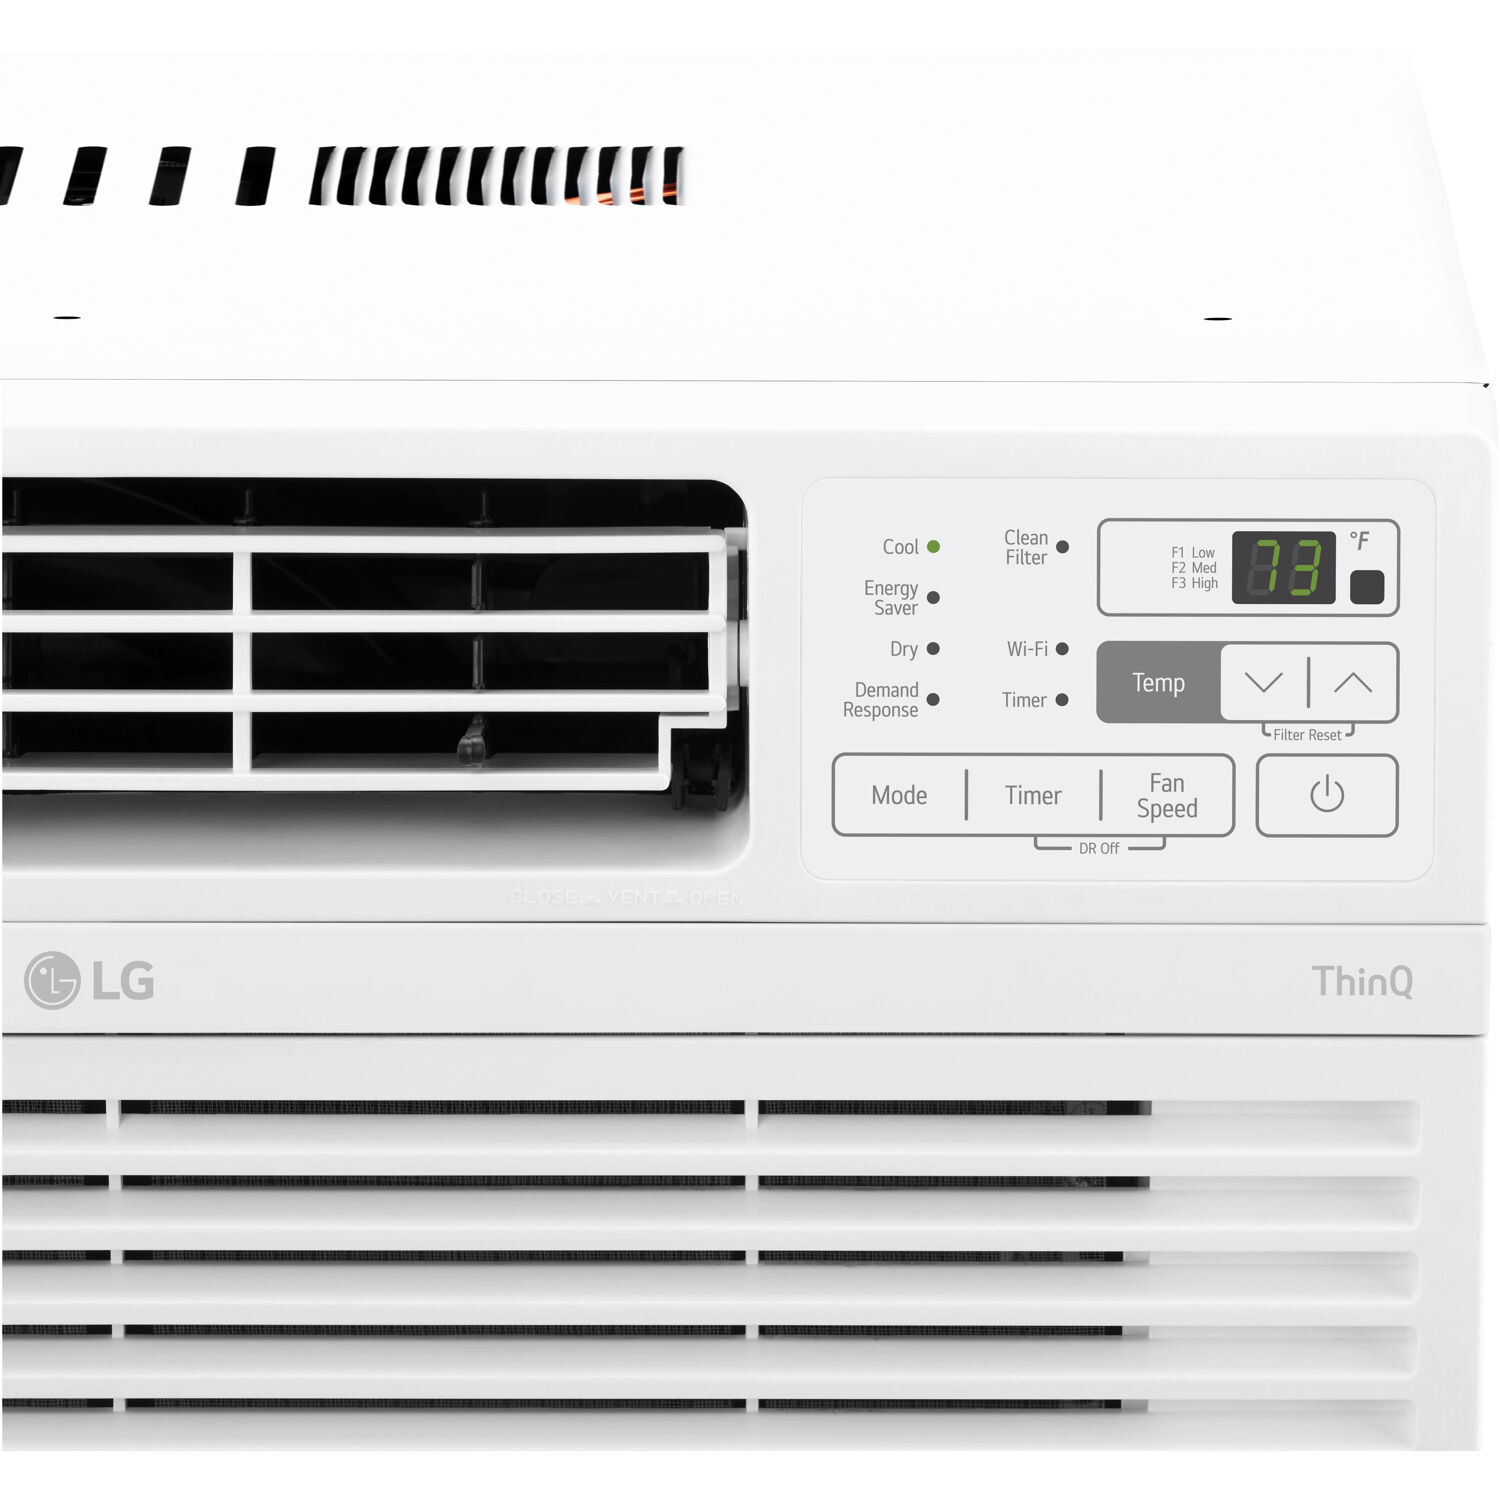 LG 8,000 BTU 115V Window-Mounted Air Conditioner with Wi-Fi Control - image 5 of 11